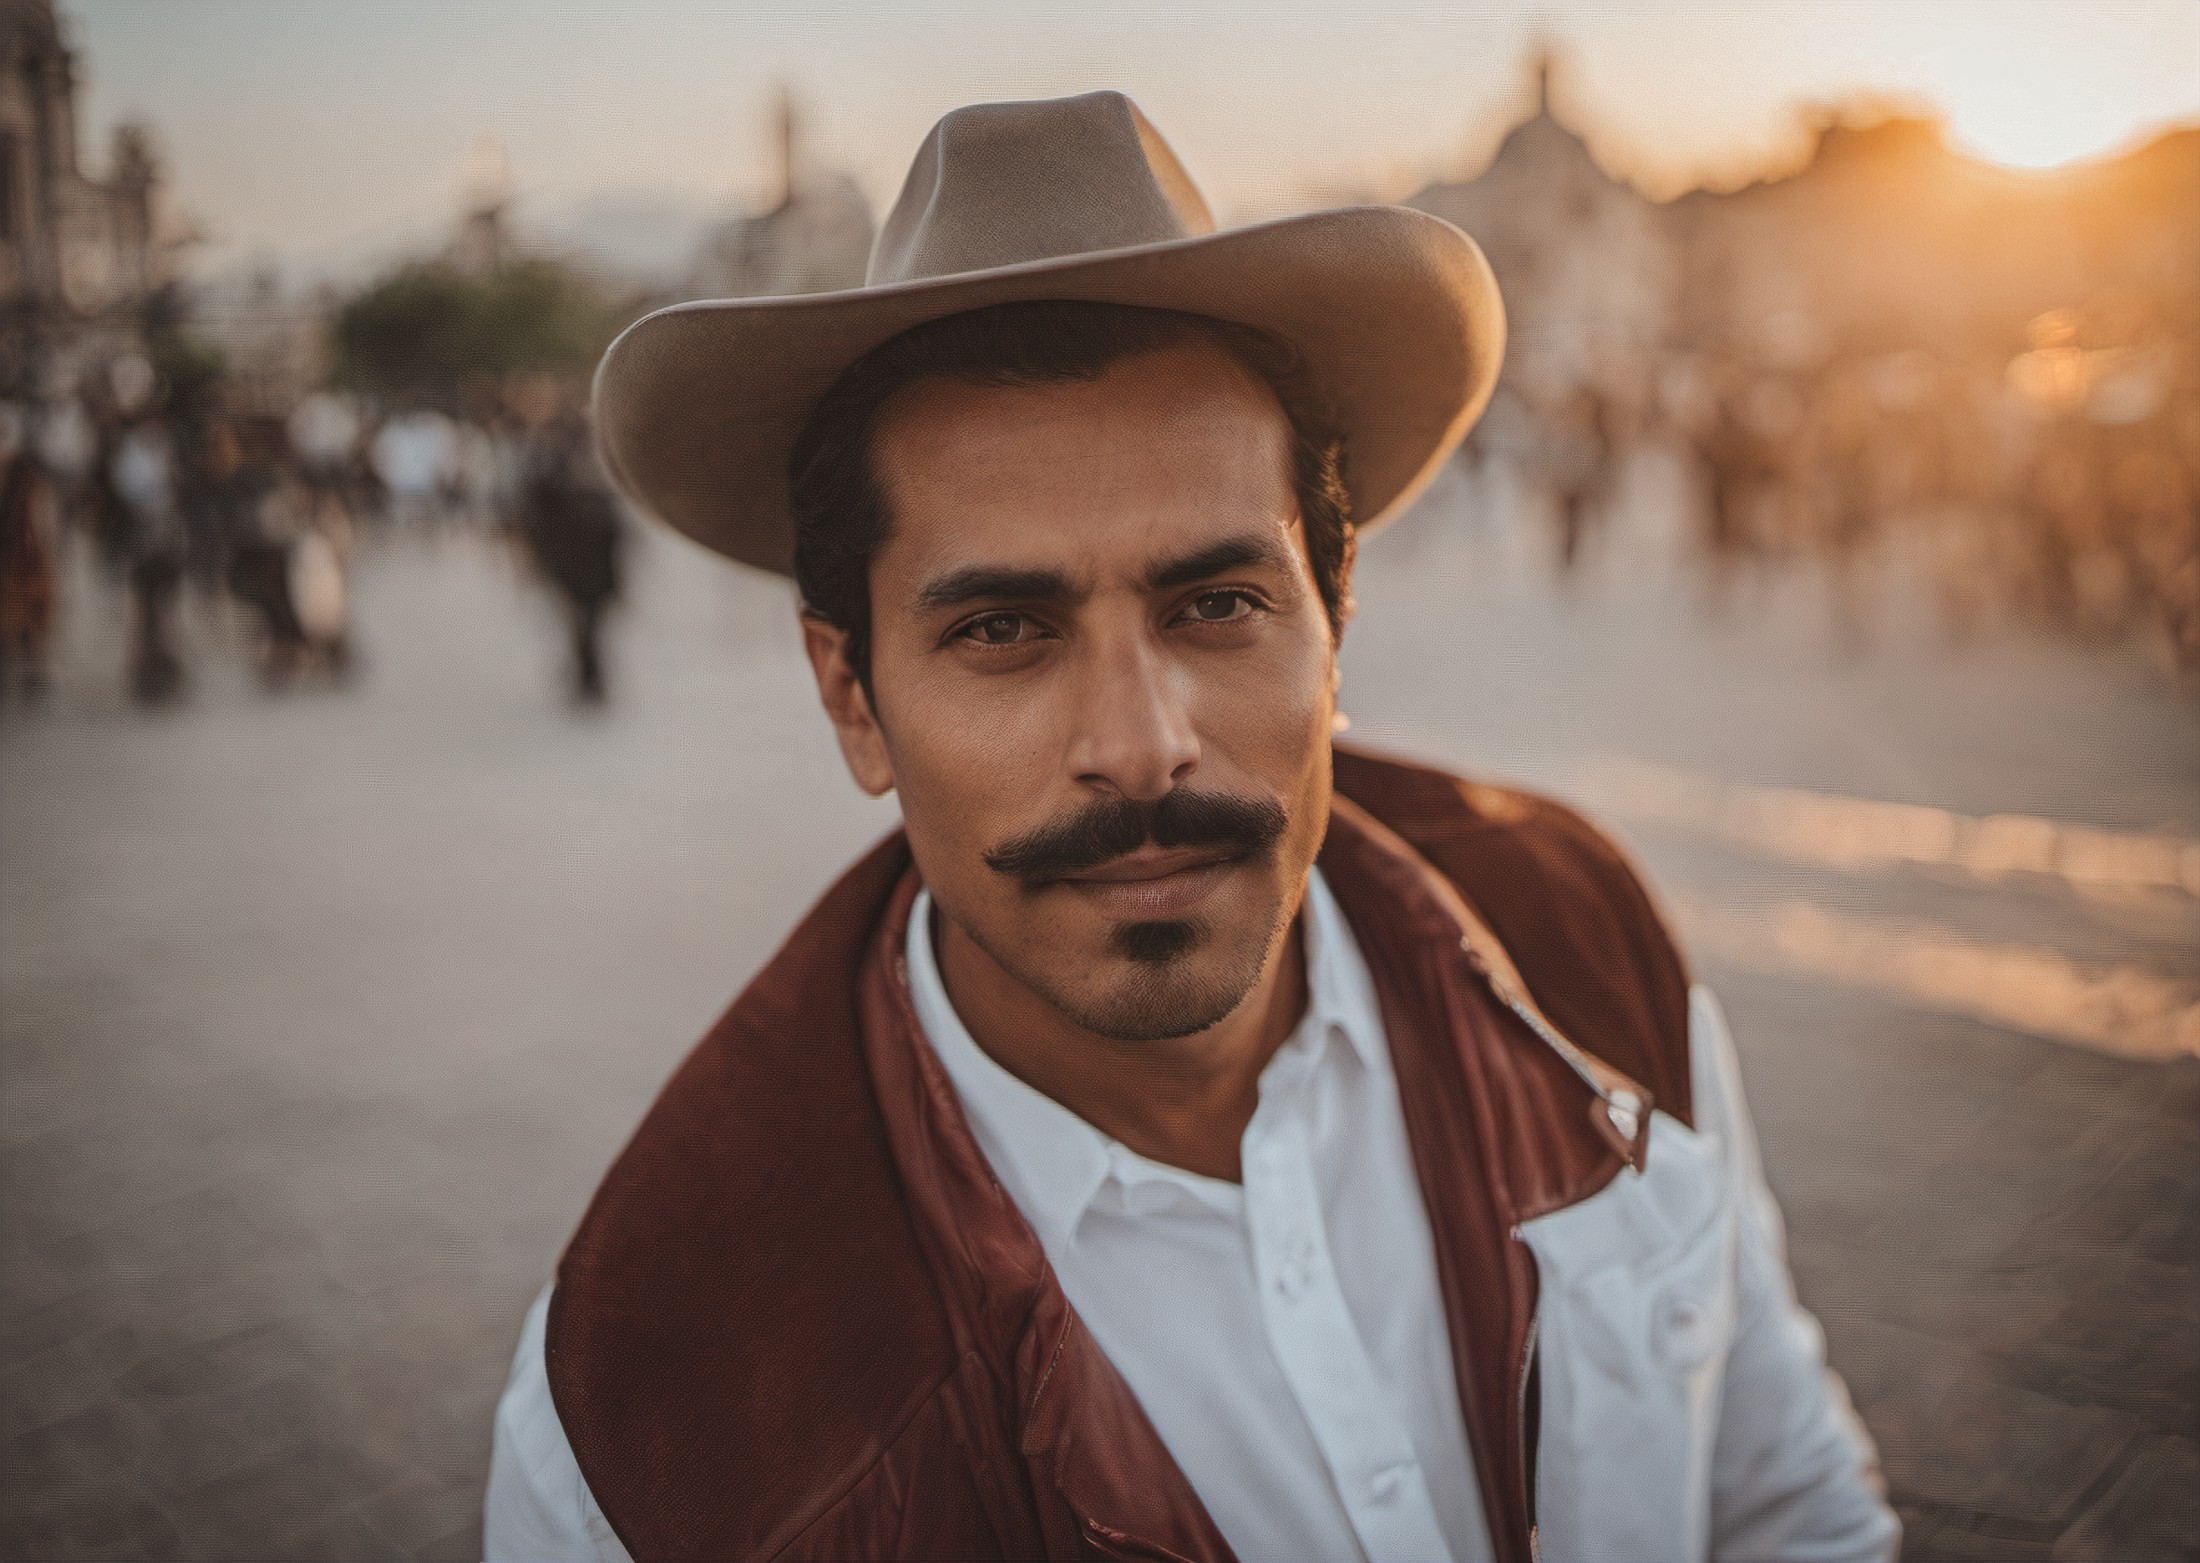 ~*~Cinematic~*~ portrait Cepillin man in Mexico City, Festival Holiday. Dawn, sunset, professional photography.
